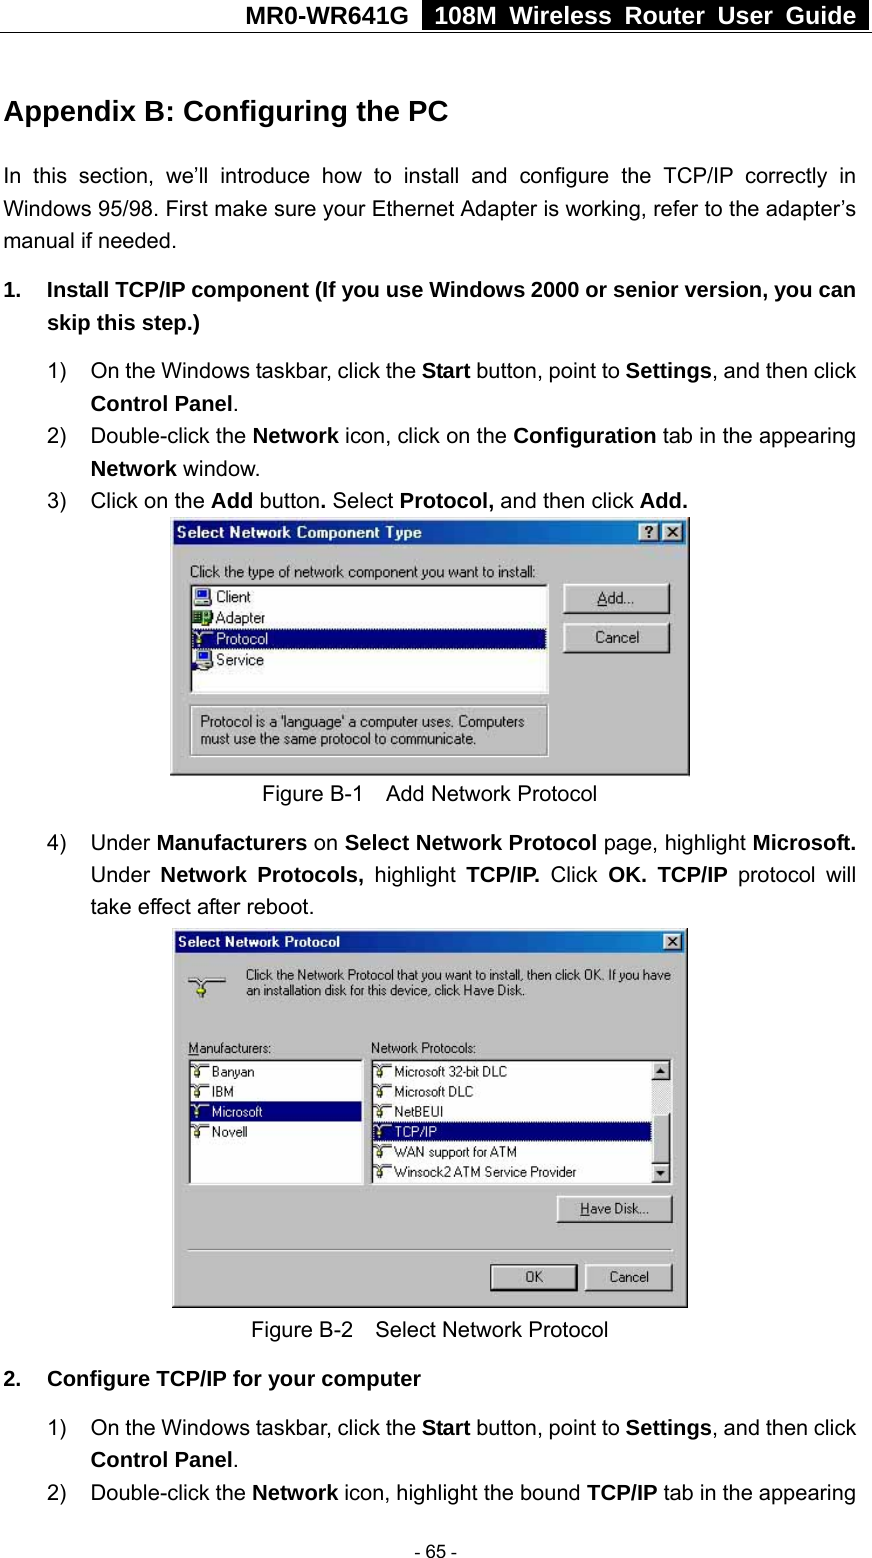 MR0-WR641G   108M Wireless Router User Guide  Appendix B: Configuring the PC In this section, we’ll introduce how to install and configure the TCP/IP correctly in Windows 95/98. First make sure your Ethernet Adapter is working, refer to the adapter’s manual if needed.   1.  Install TCP/IP component (If you use Windows 2000 or senior version, you can skip this step.) 1)  On the Windows taskbar, click the Start button, point to Settings, and then click Control Panel. 2) Double-click the Network icon, click on the Configuration tab in the appearing Network window.  3)  Click on the Add button. Select Protocol, and then click Add.  Figure B-1    Add Network Protocol 4) Under Manufacturers on Select Network Protocol page, highlight Microsoft. Under Network Protocols, highlight TCP/IP. Click OK. TCP/IP protocol will take effect after reboot.  Figure B-2    Select Network Protocol 2.  Configure TCP/IP for your computer 1)  On the Windows taskbar, click the Start button, point to Settings, and then click Control Panel. 2) Double-click the Network icon, highlight the bound TCP/IP tab in the appearing  - 65 - 